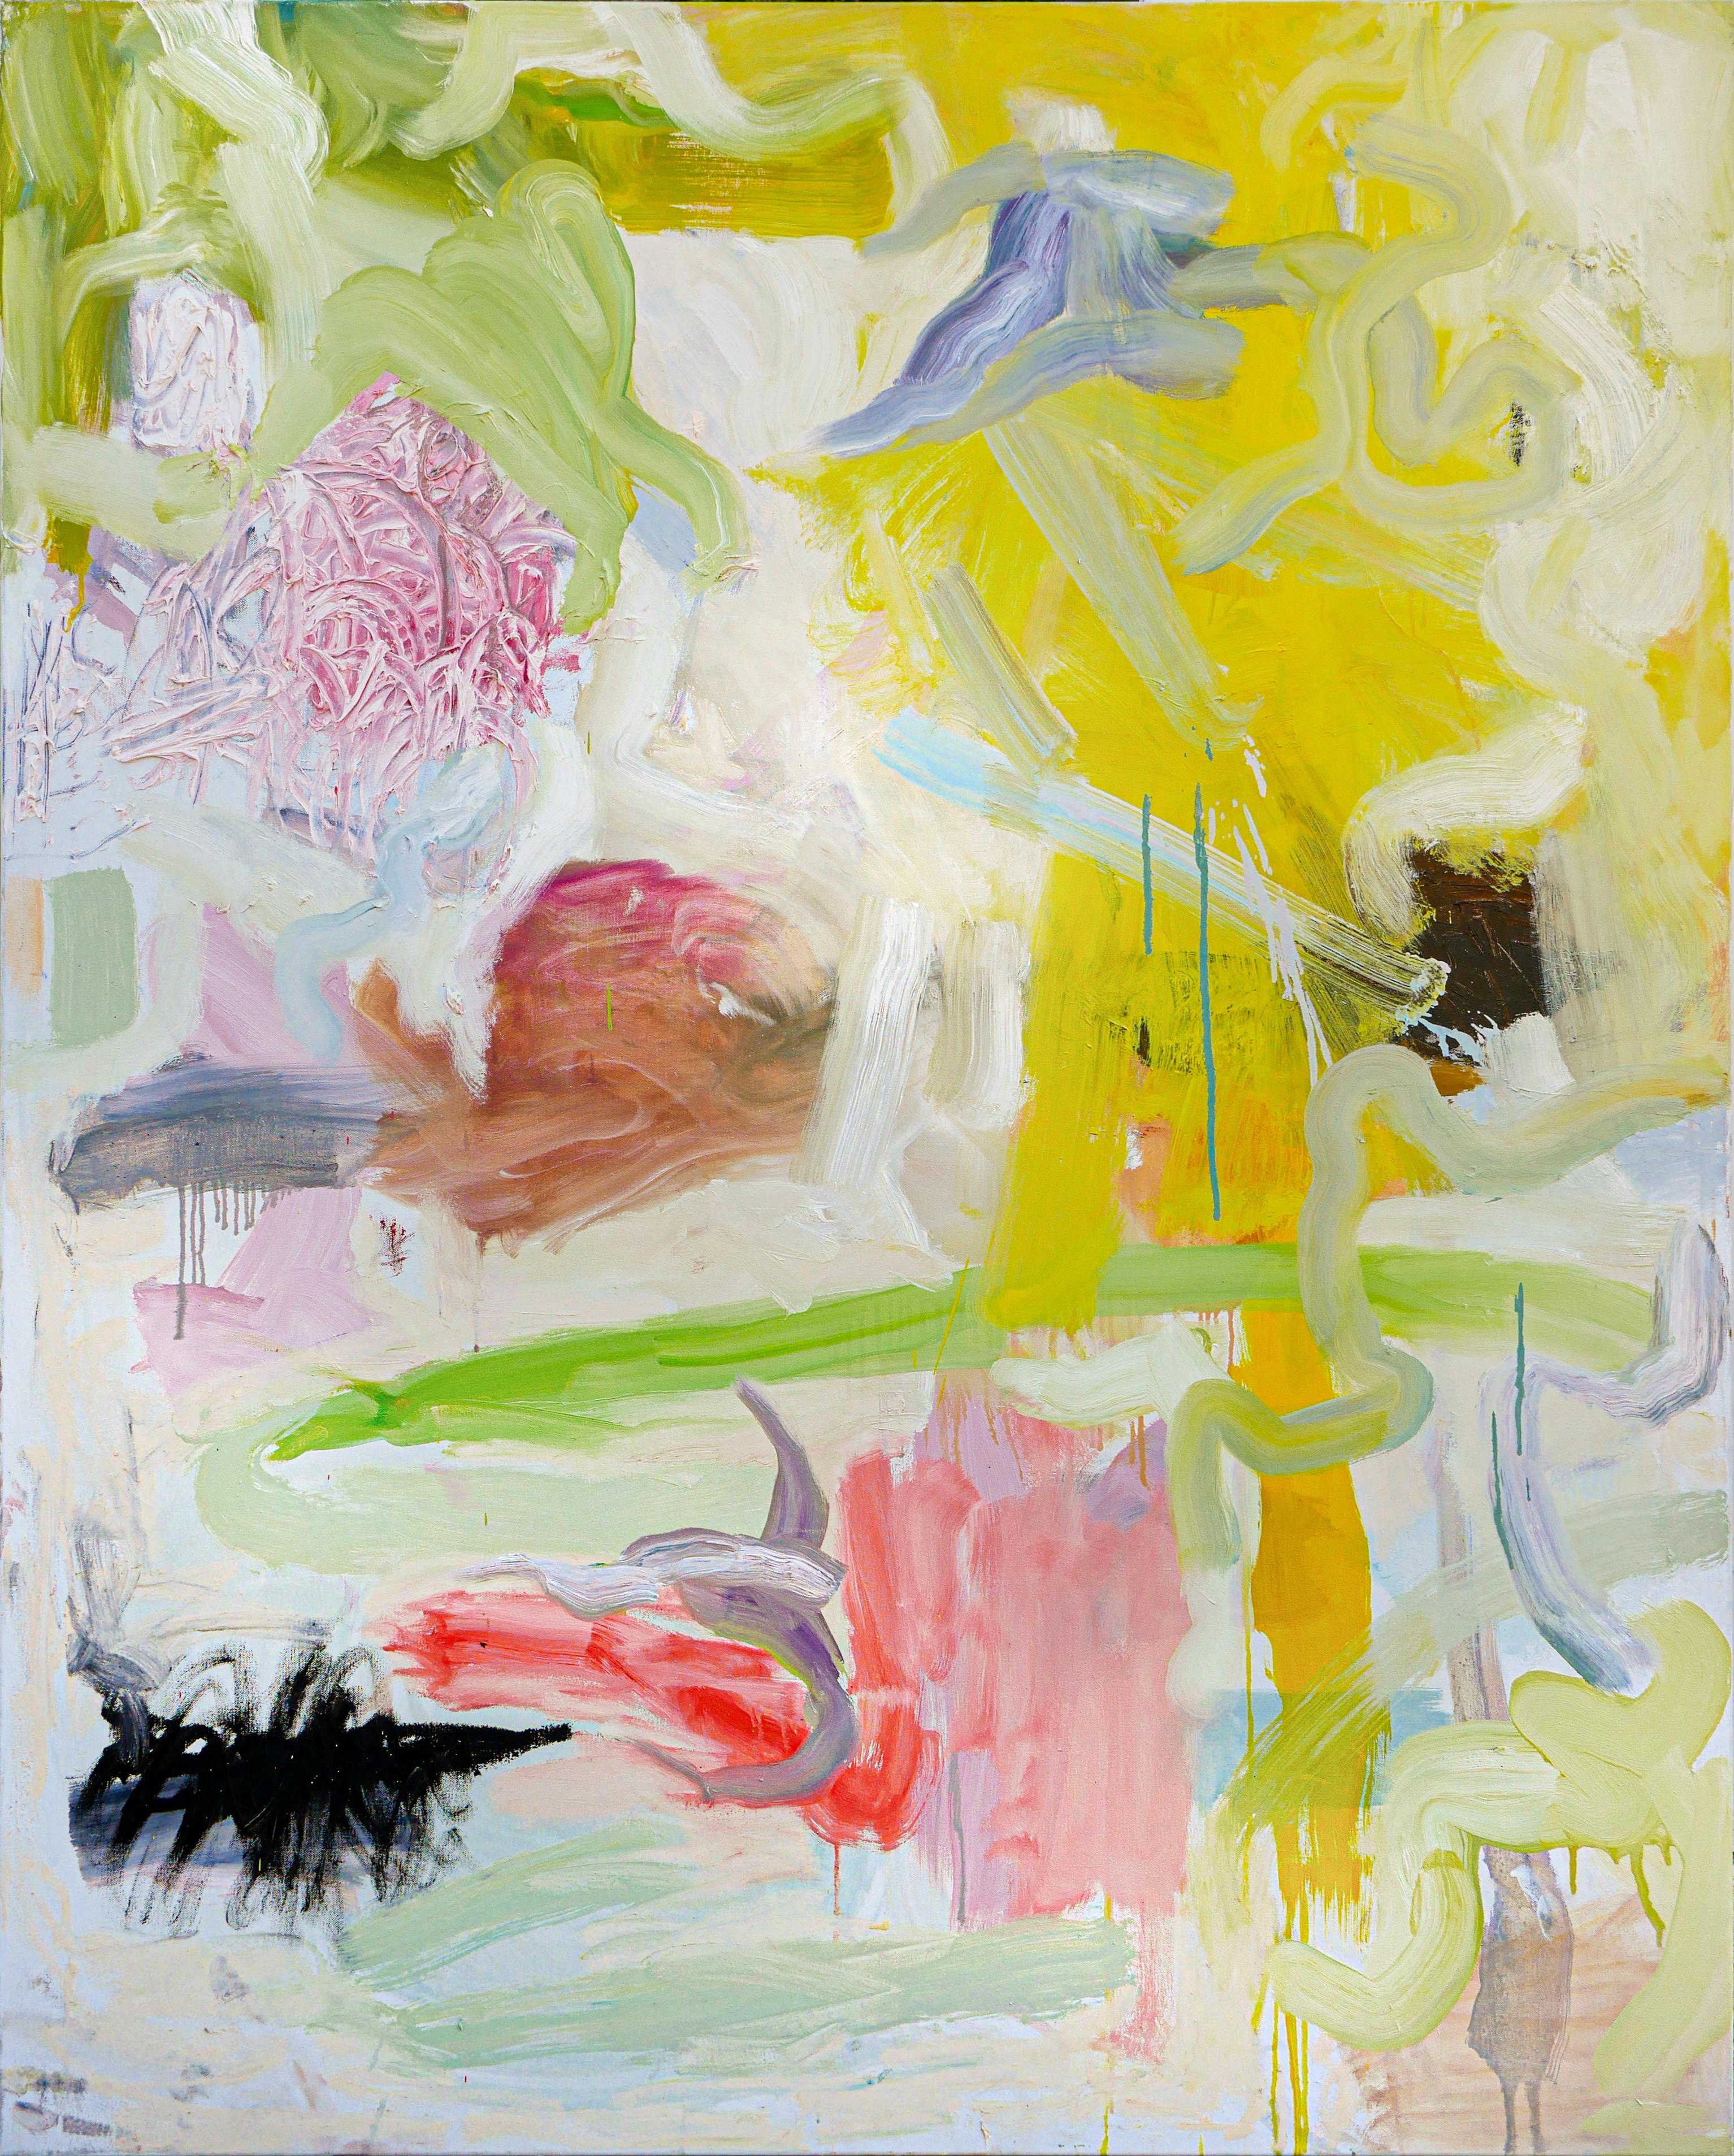 Benji Stiles Abstract Painting - "Garden #3" Pastel Green, Pink, Gray, and Blue Abstract Contemporary Painting